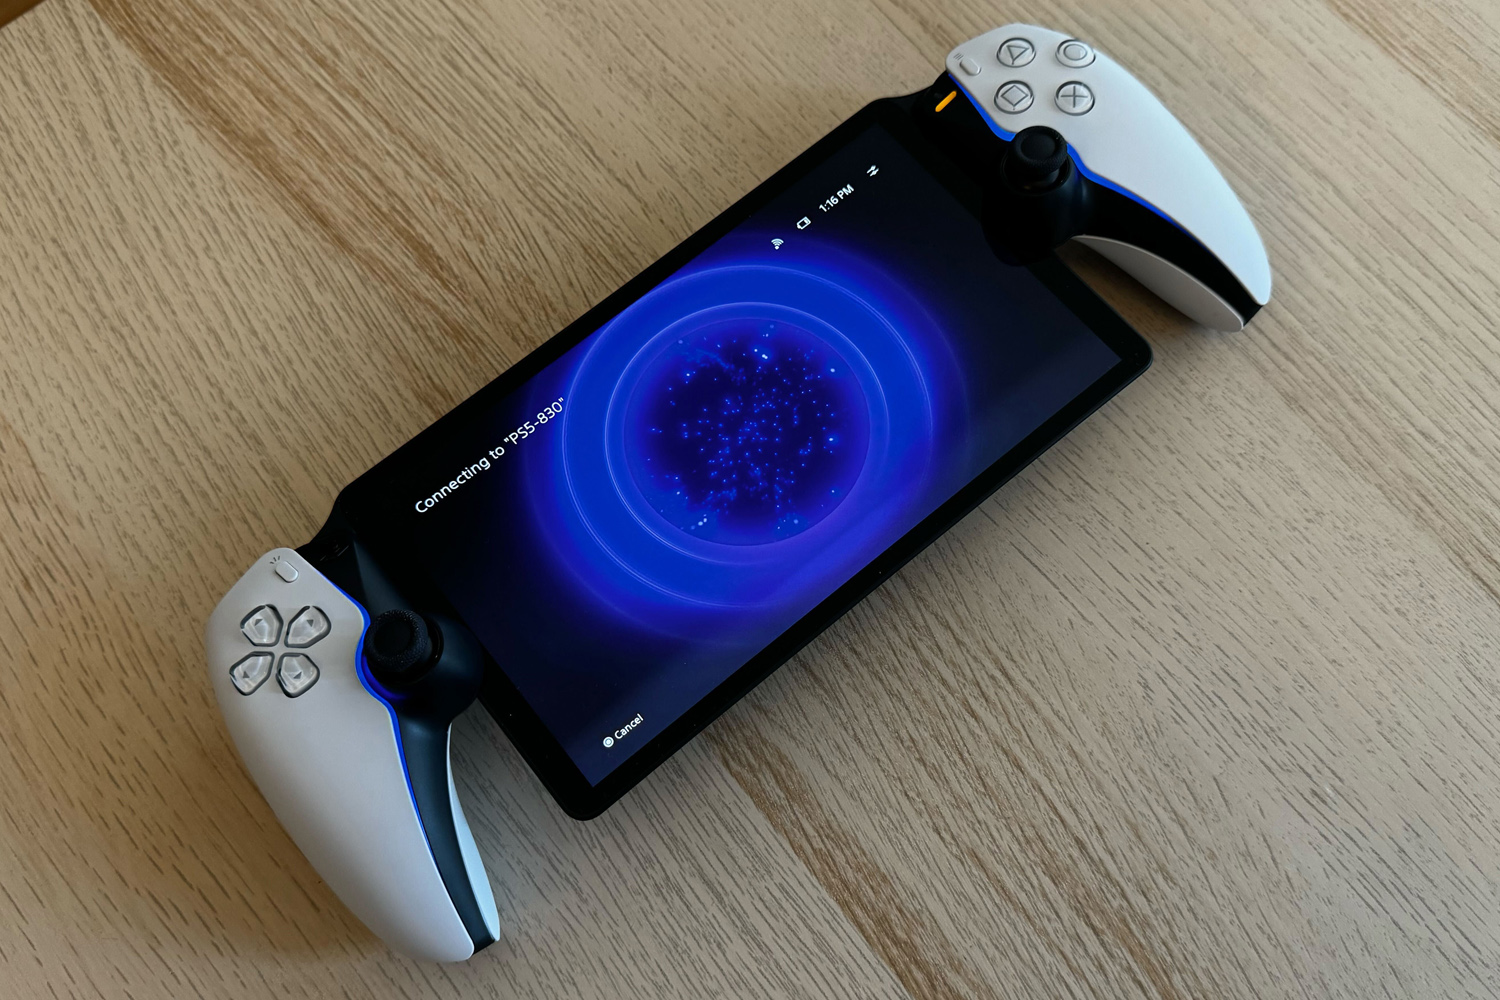 PlayStation Portal: Hands On With Sony's New Remote Play Handheld 